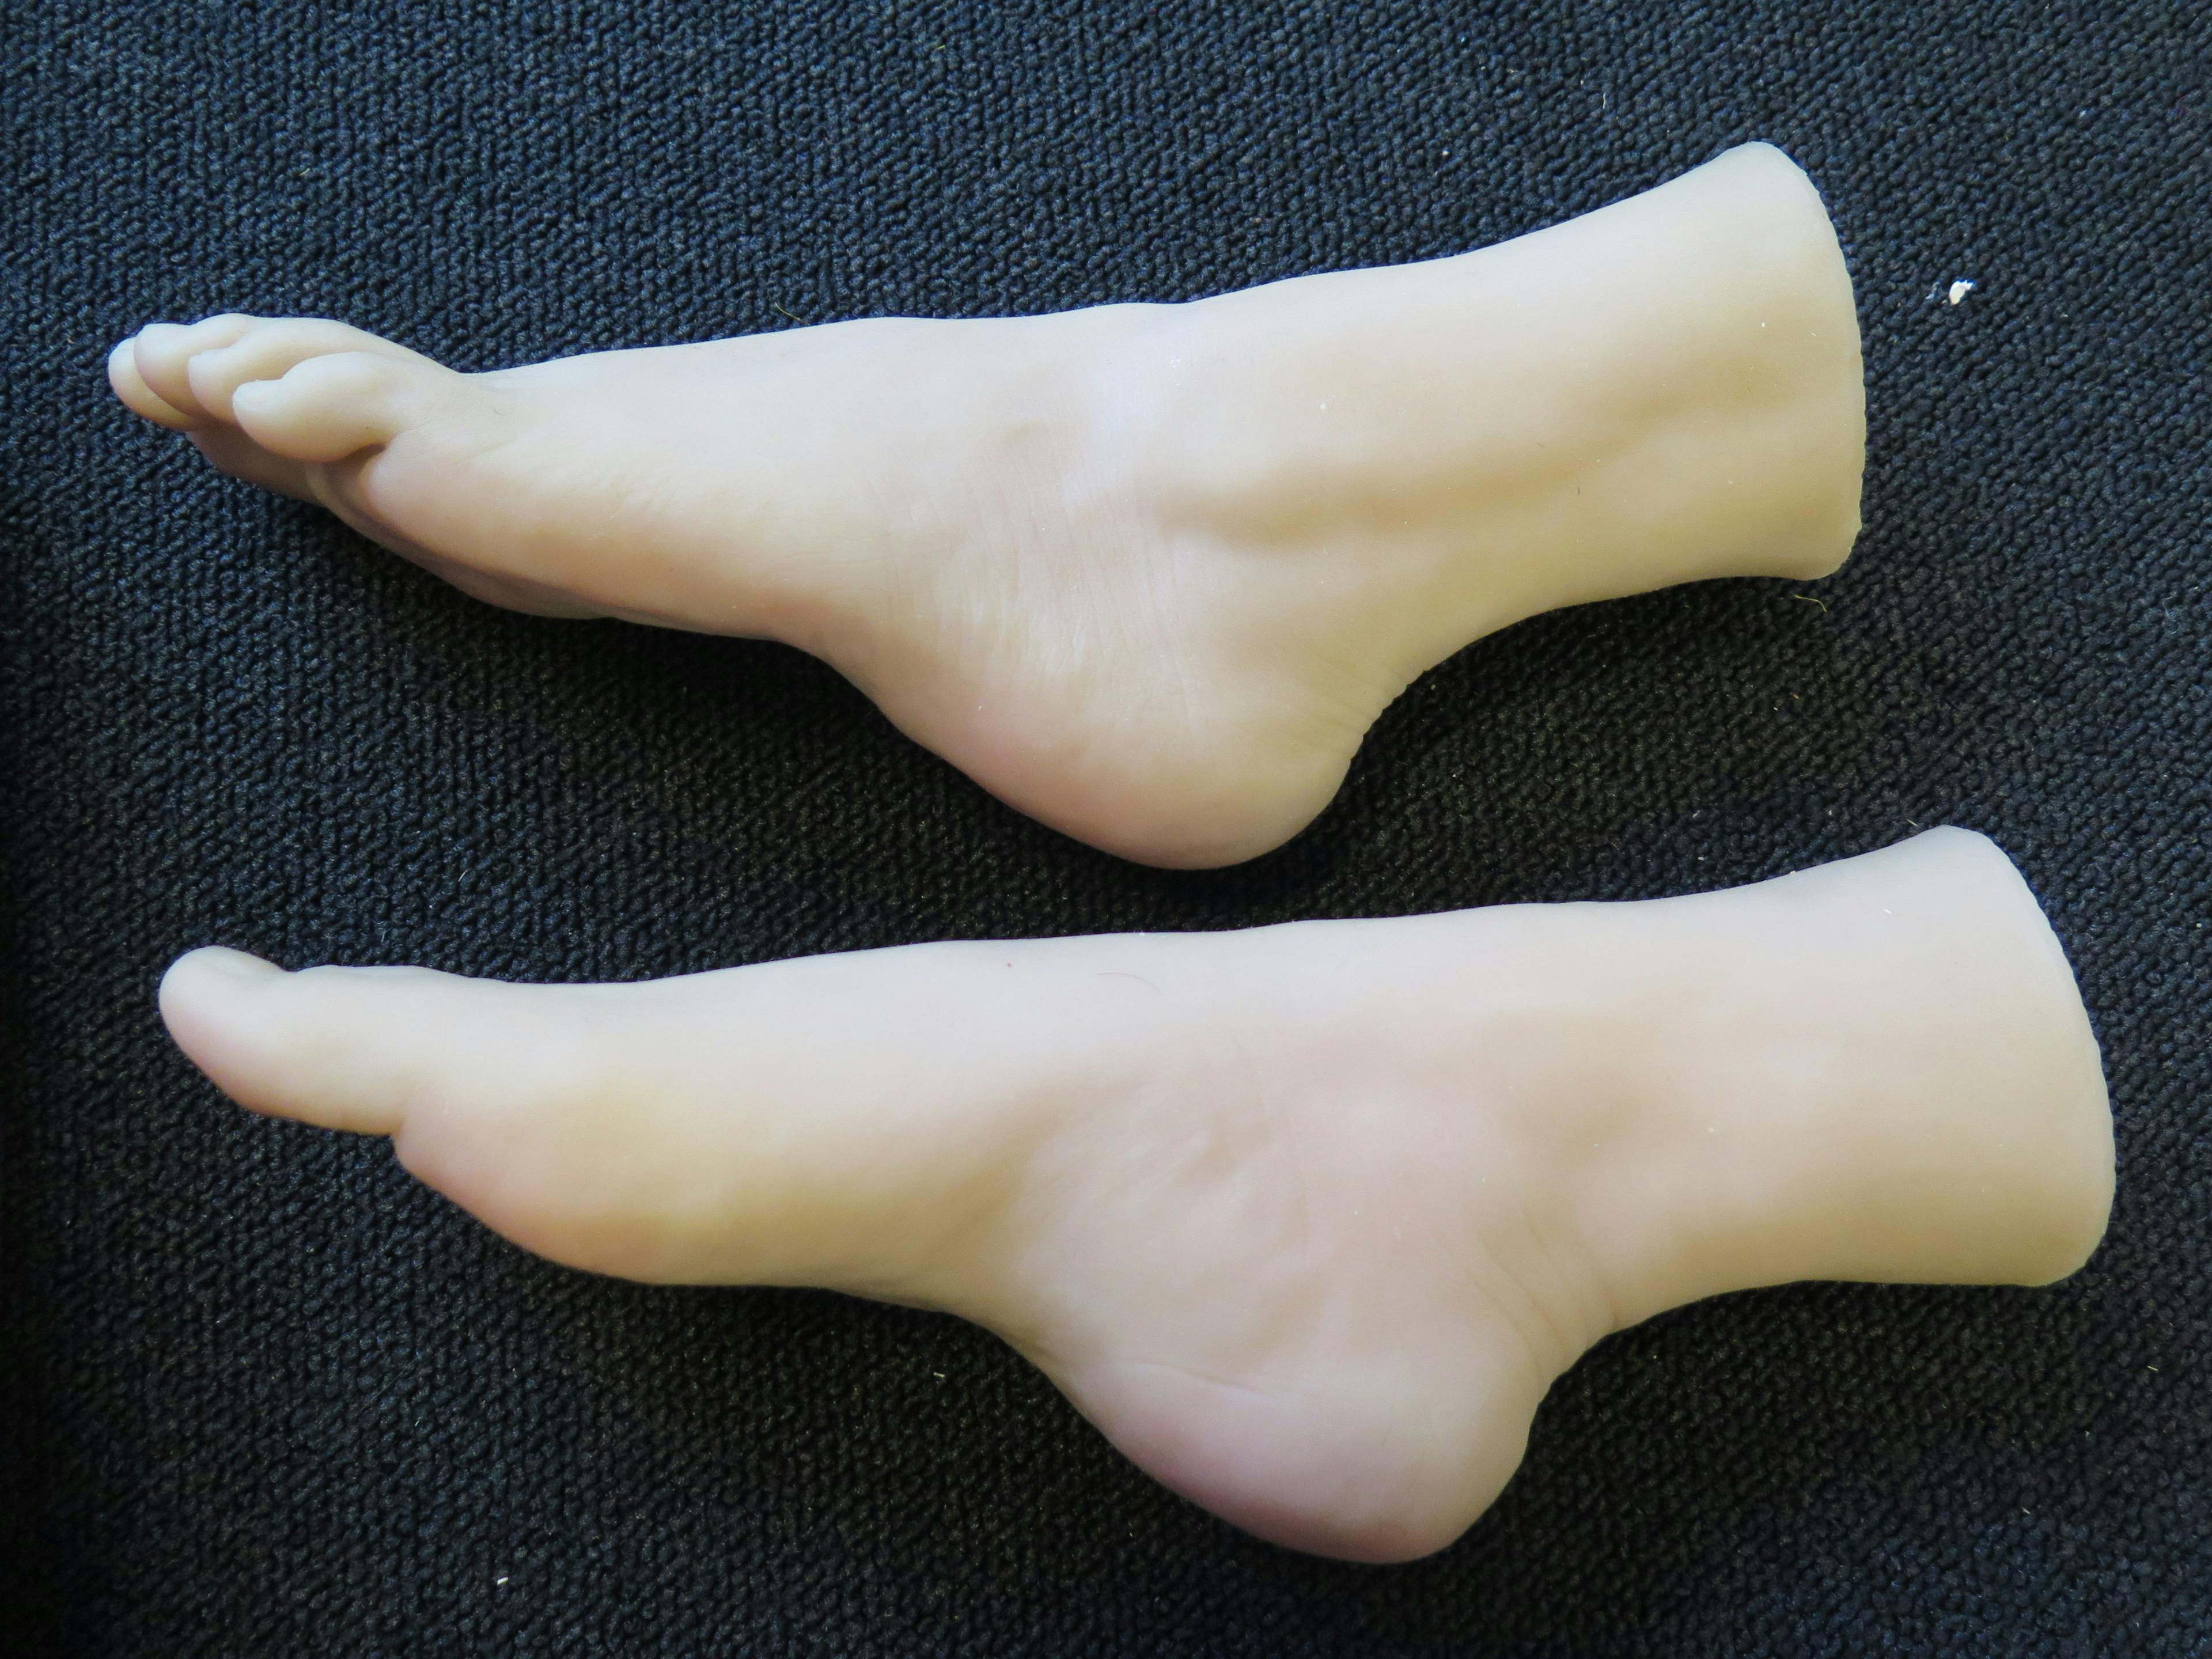 A photograph of a pair of prostheses feet placed on black fabric. 